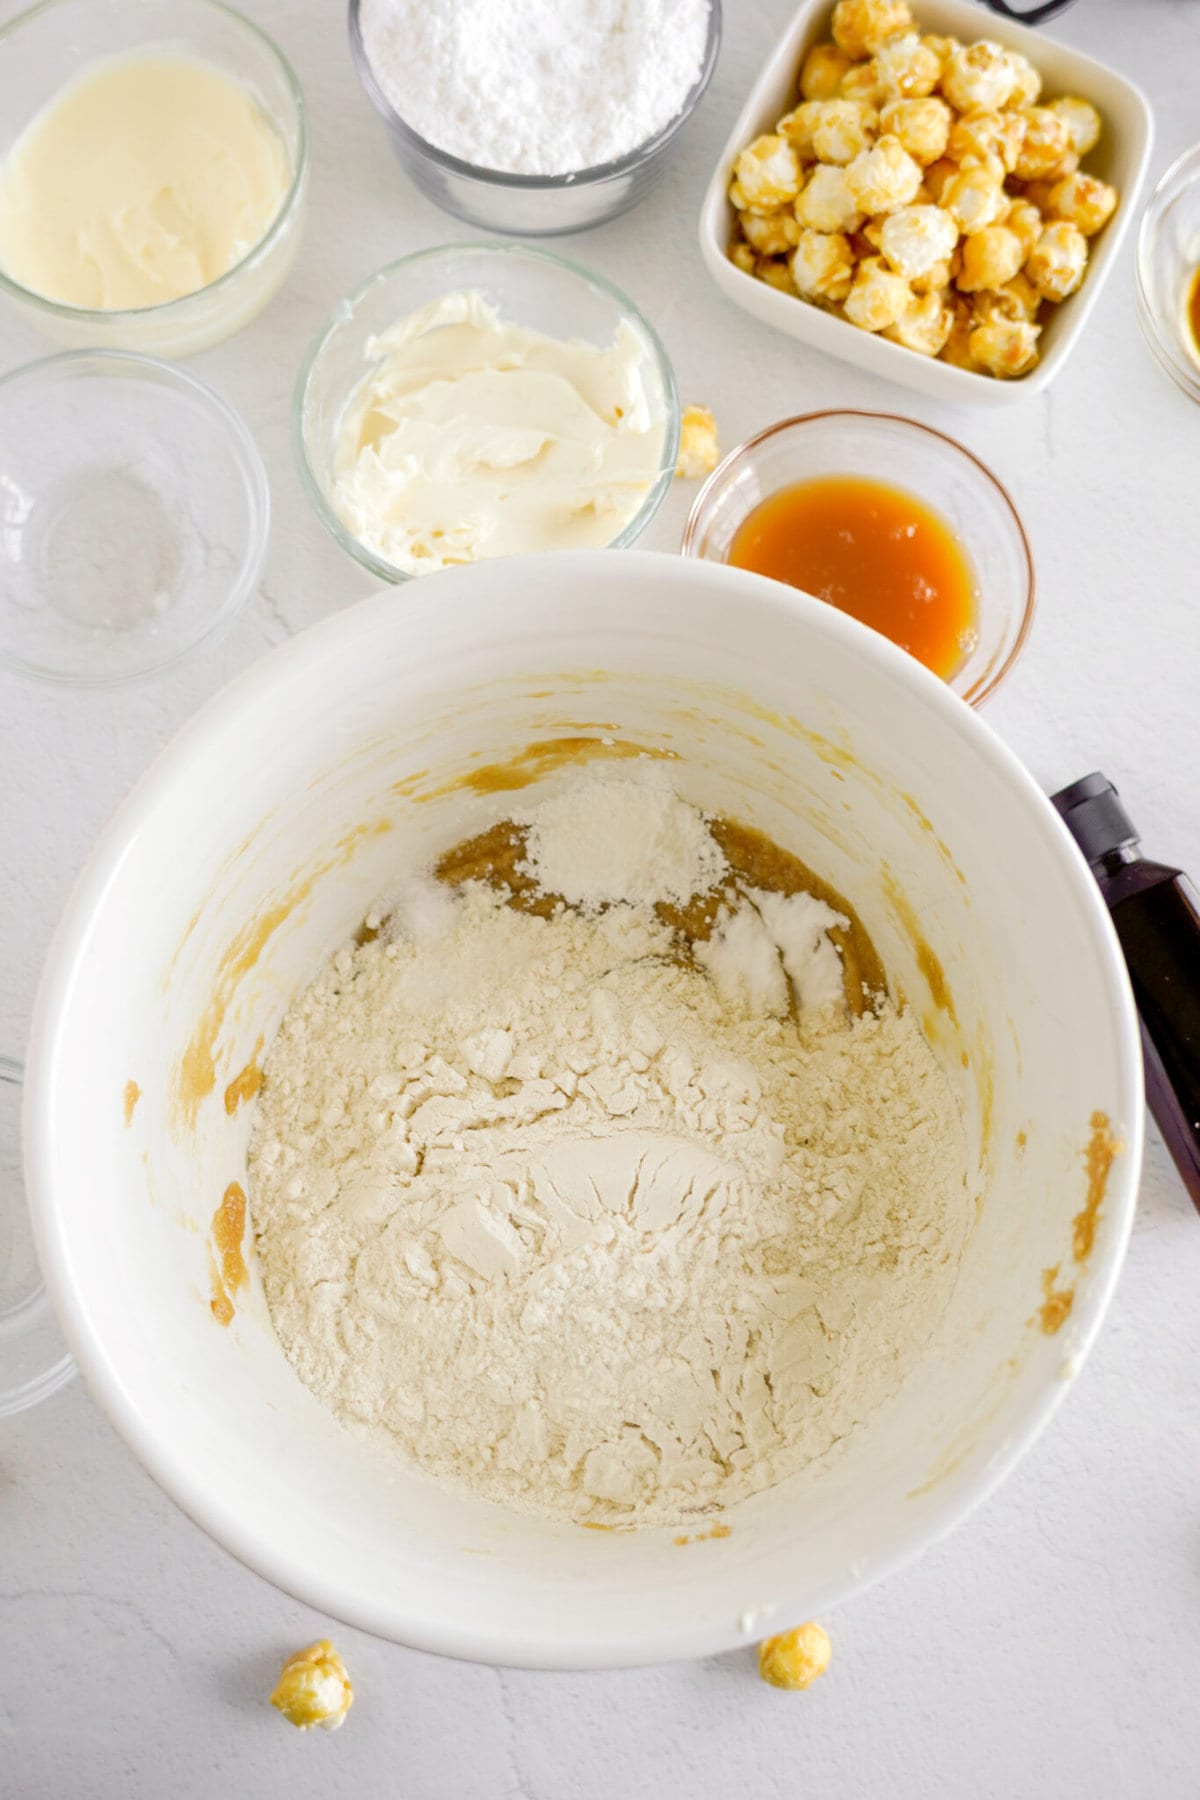 Adding the flour to the batter.